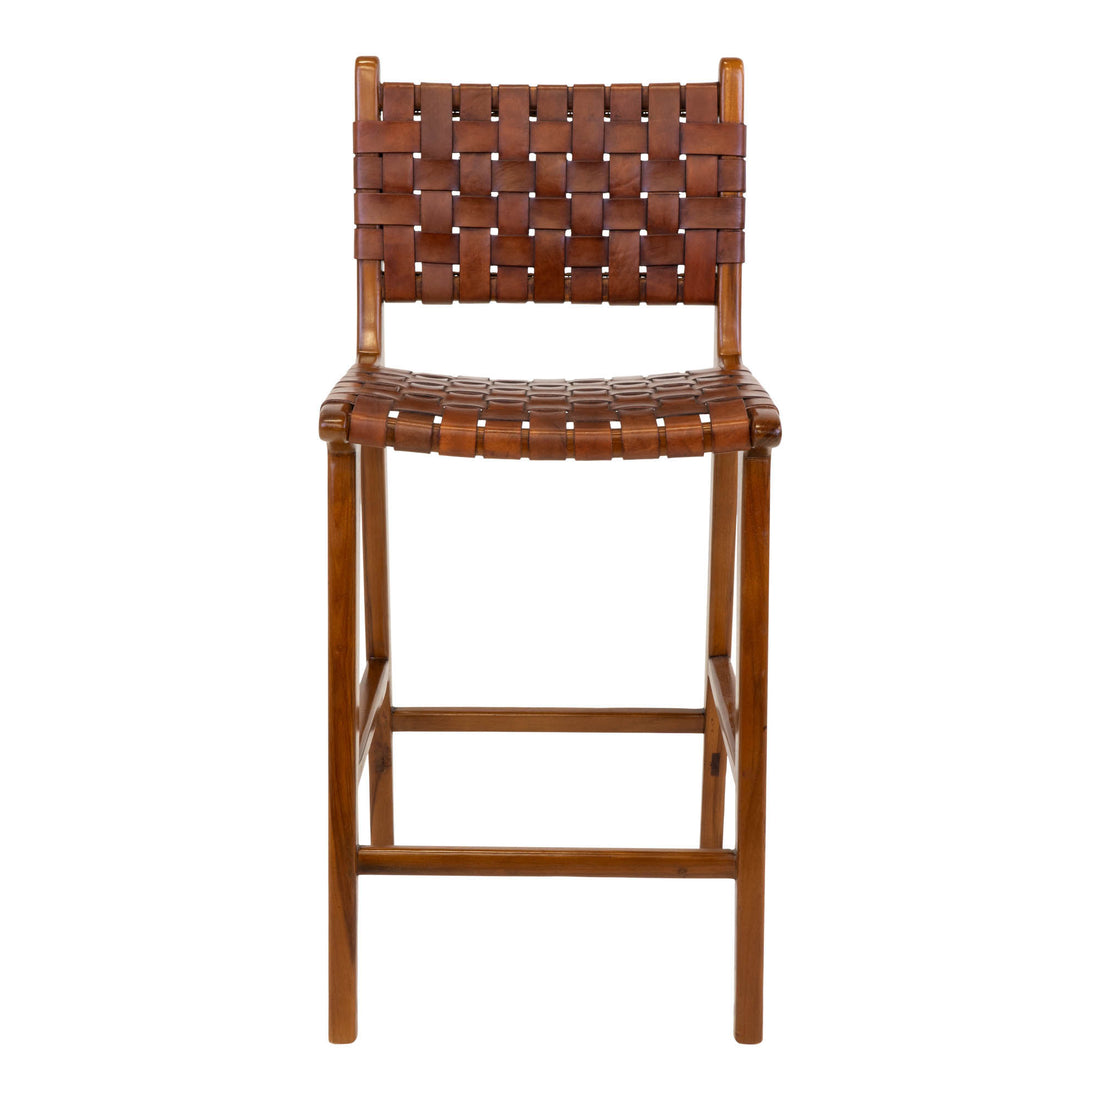 Perugia Counter chair - Perugia Counter chair in brown with brown leather - 1 - pcs